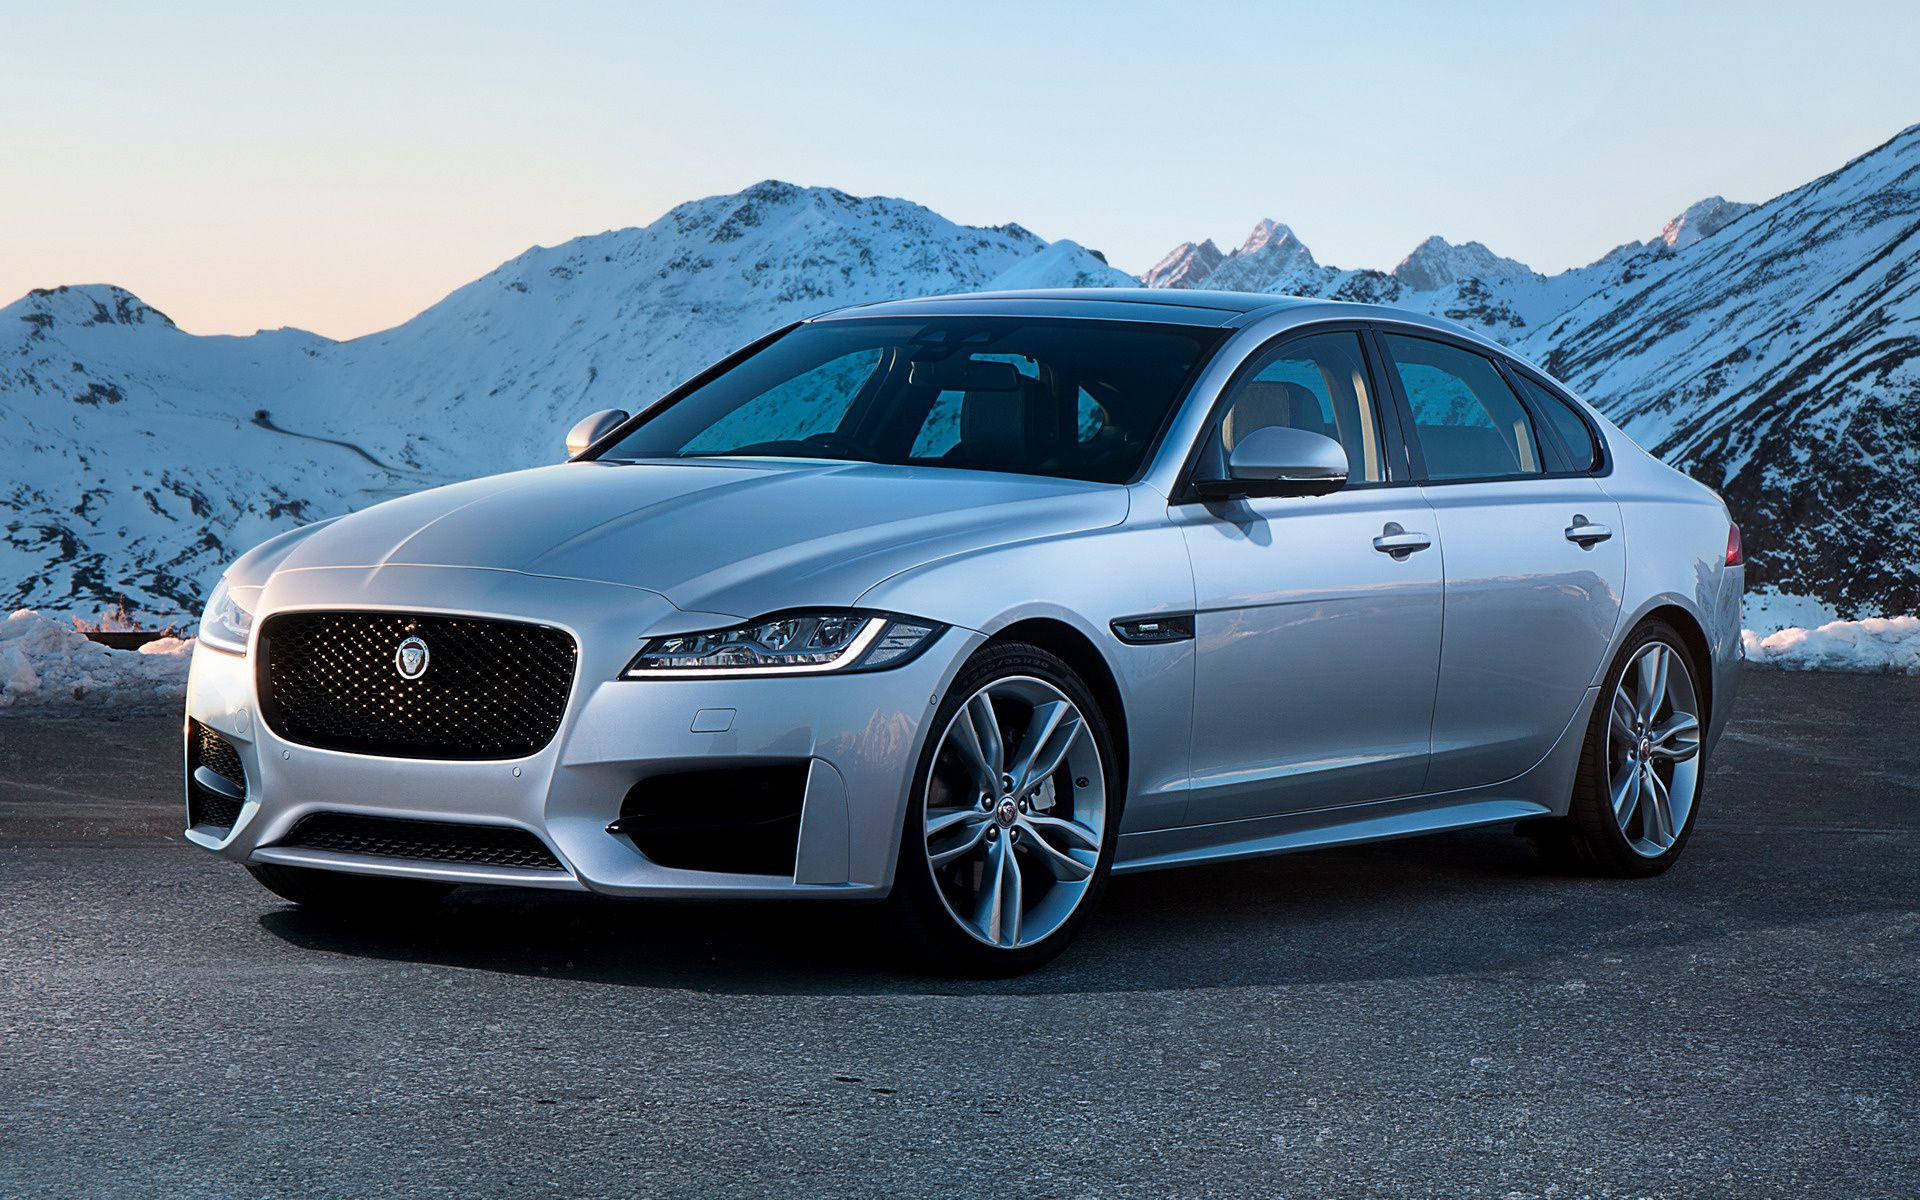 Silver Jaguar Car And Snowy Mountains Background